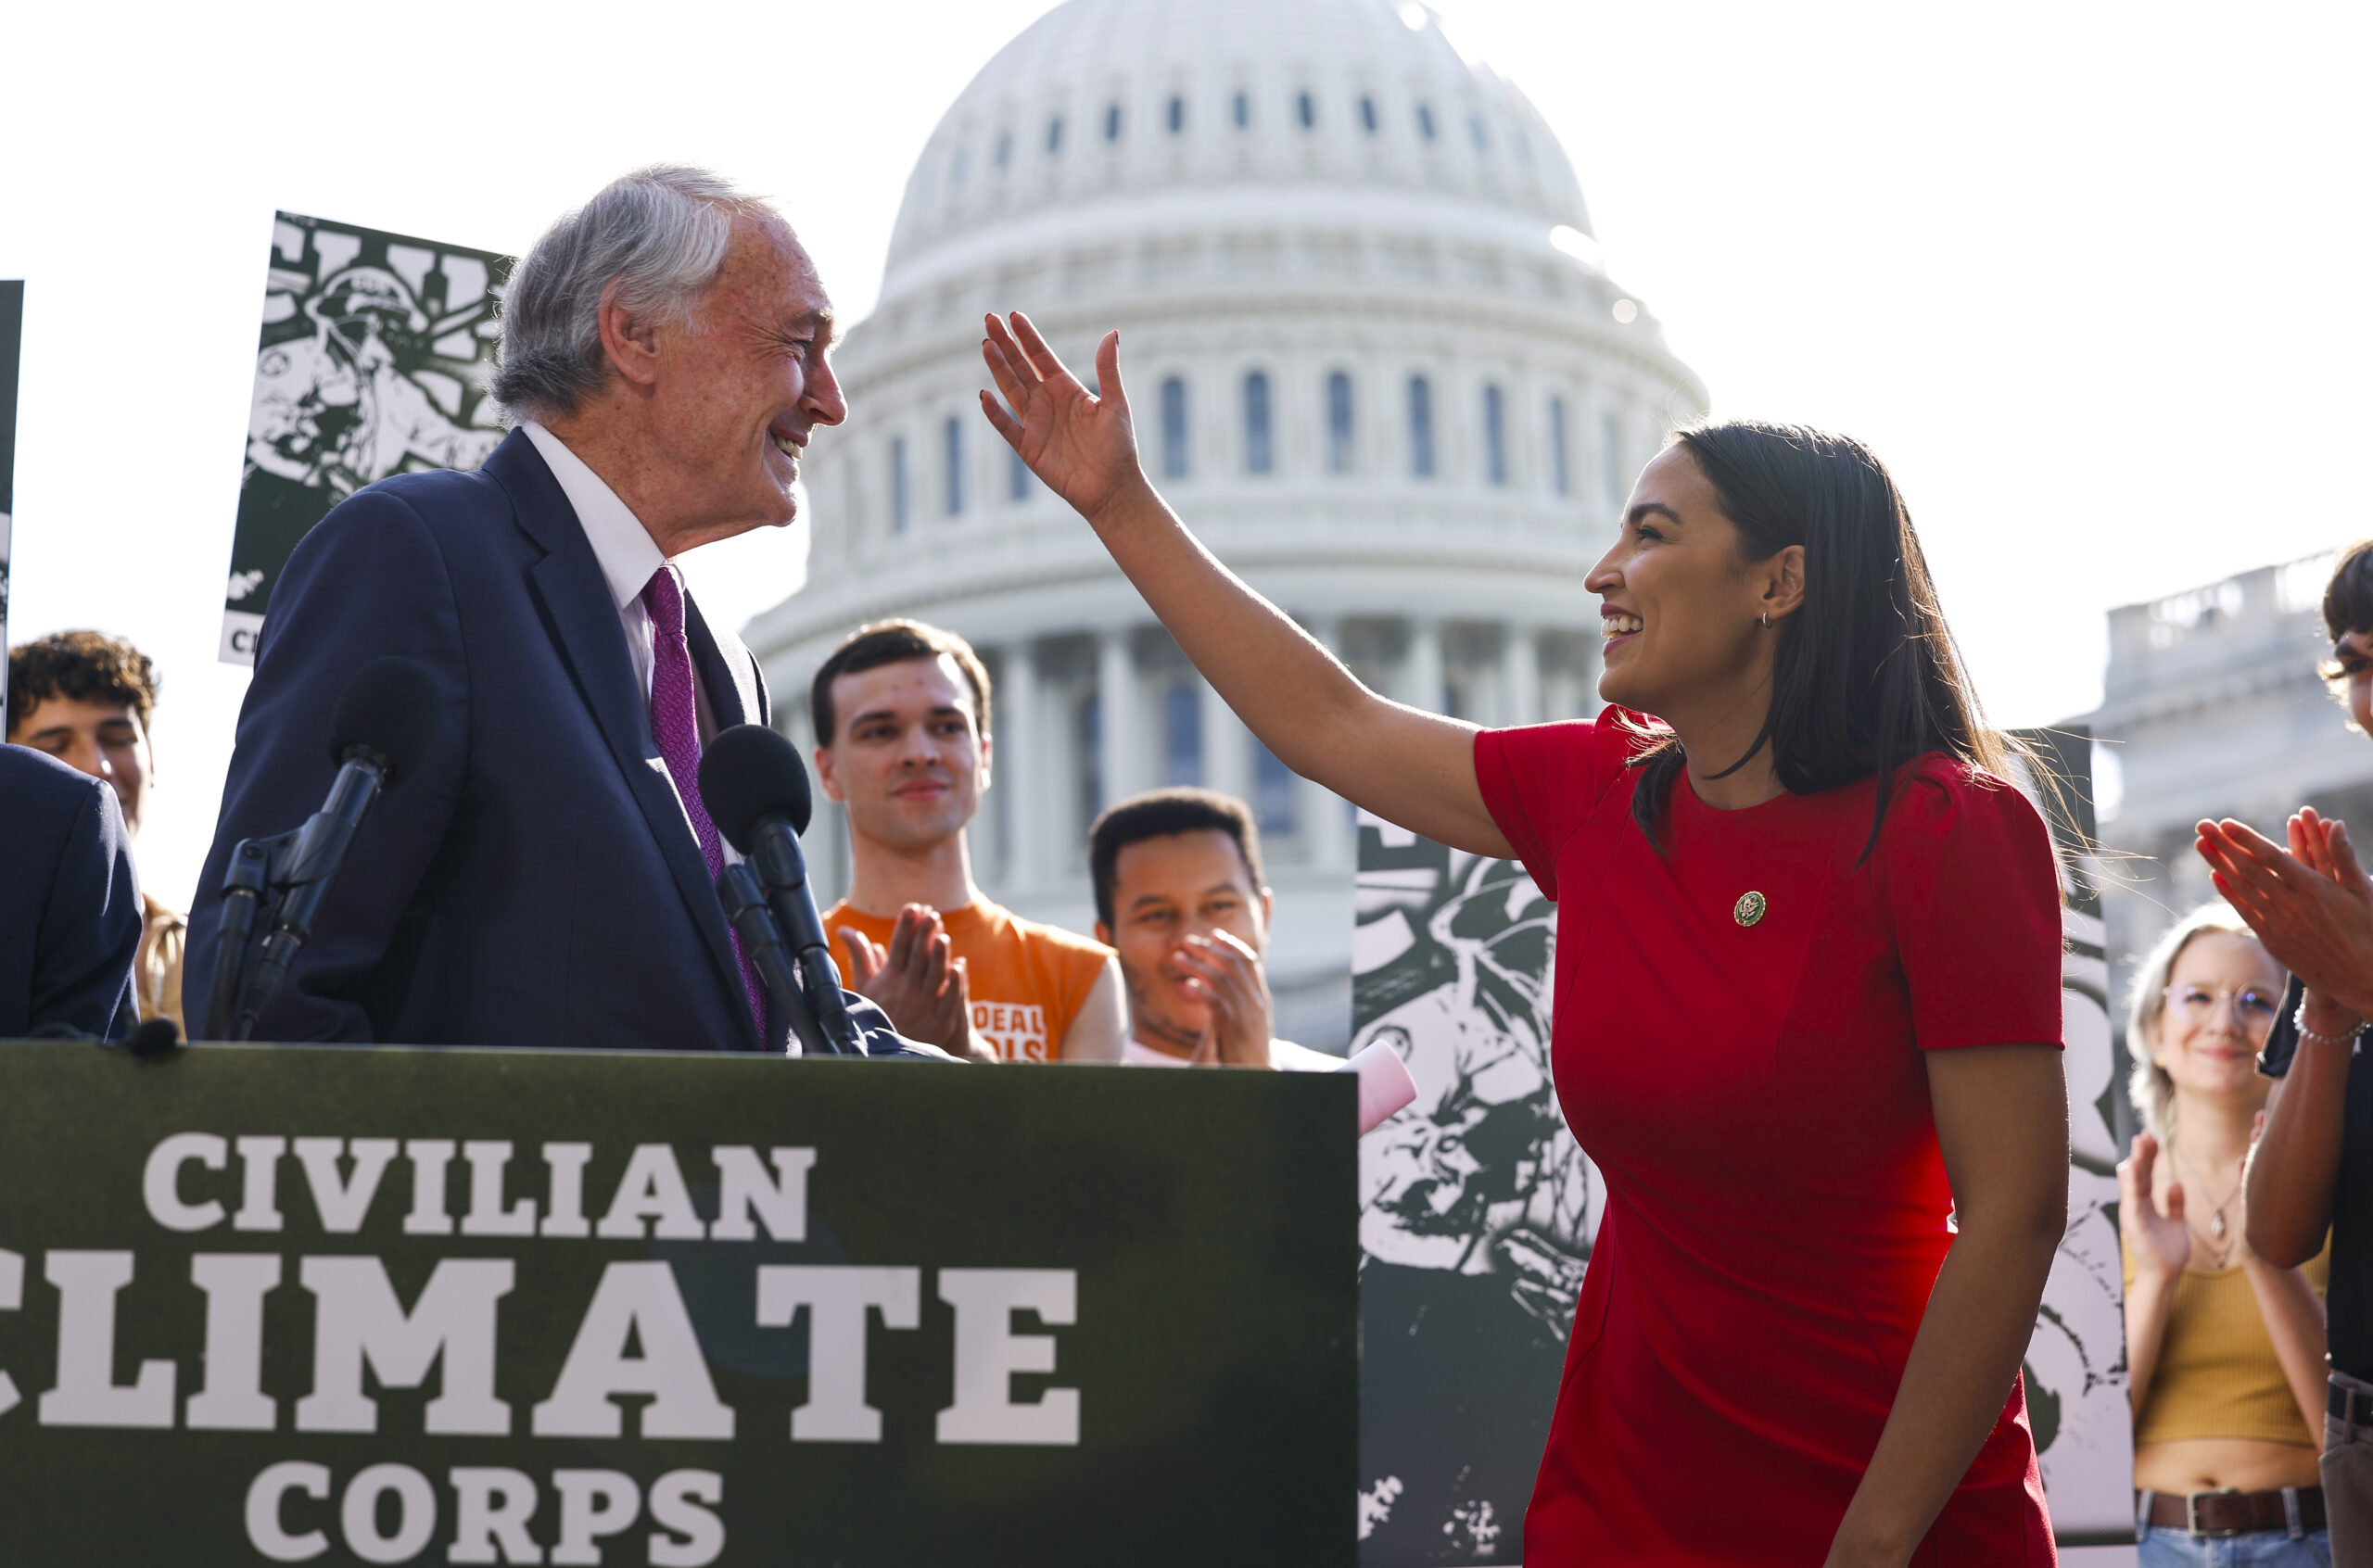 Rep. Alexandria Ocasio-Cortez (D-NY) hugs Sen. Ed Markey (D-MA) as they speak at a news conference in September 2023 on the launch of the American Climate Corps outside the U.S. Capitol. Credit: Anna Moneymaker/Getty Images.